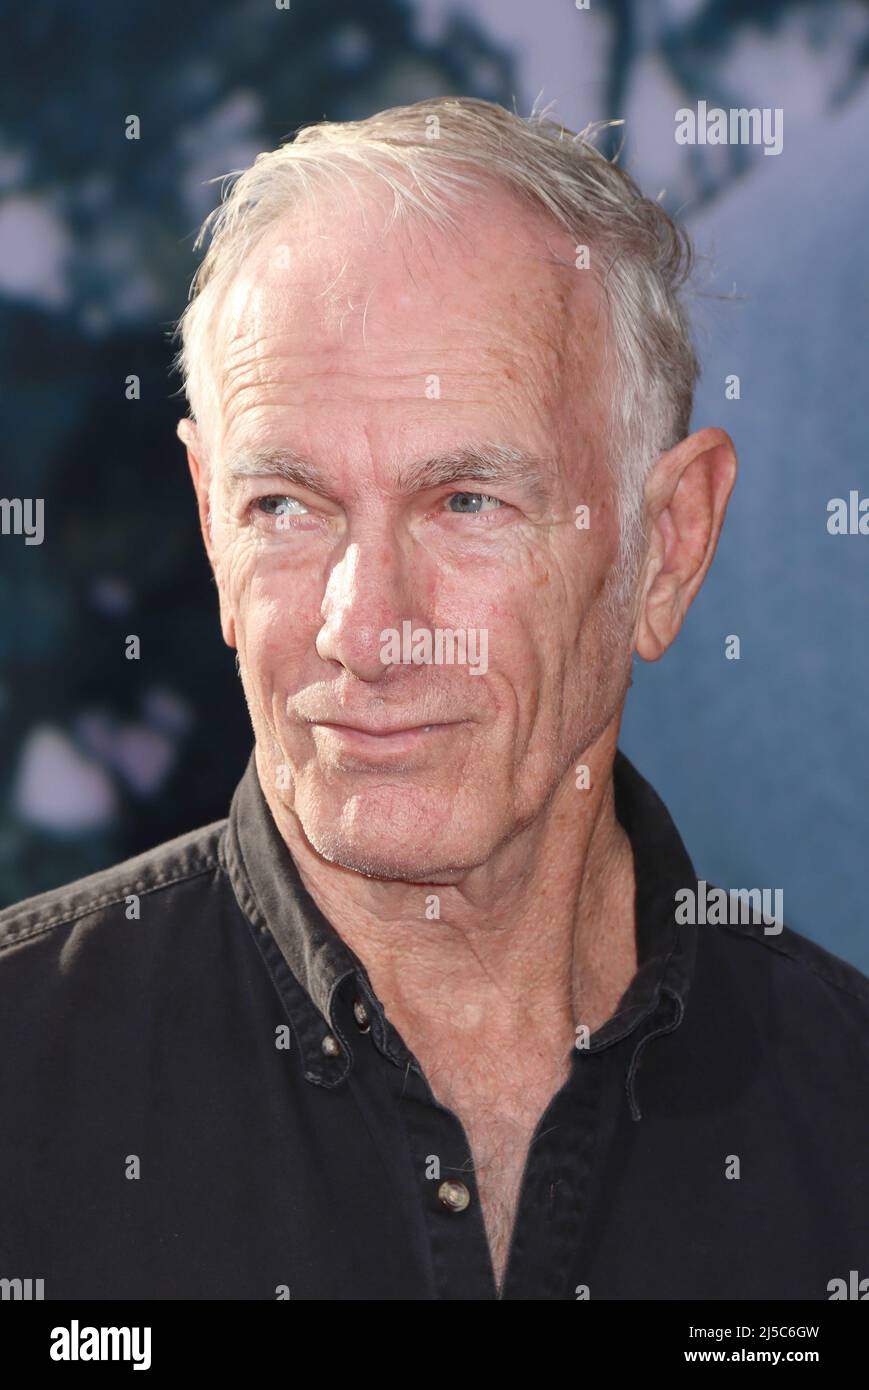 Los Angeles, USA. 21st Apr, 2022. John Sayles 2022/04/21 The 40th Anniversary Screening of “E.T. the Extra-Terrestrial” held at TCL Chinese Theatre in Hollywood, CA, Credit: Cronos/Alamy Live News Stock Photo